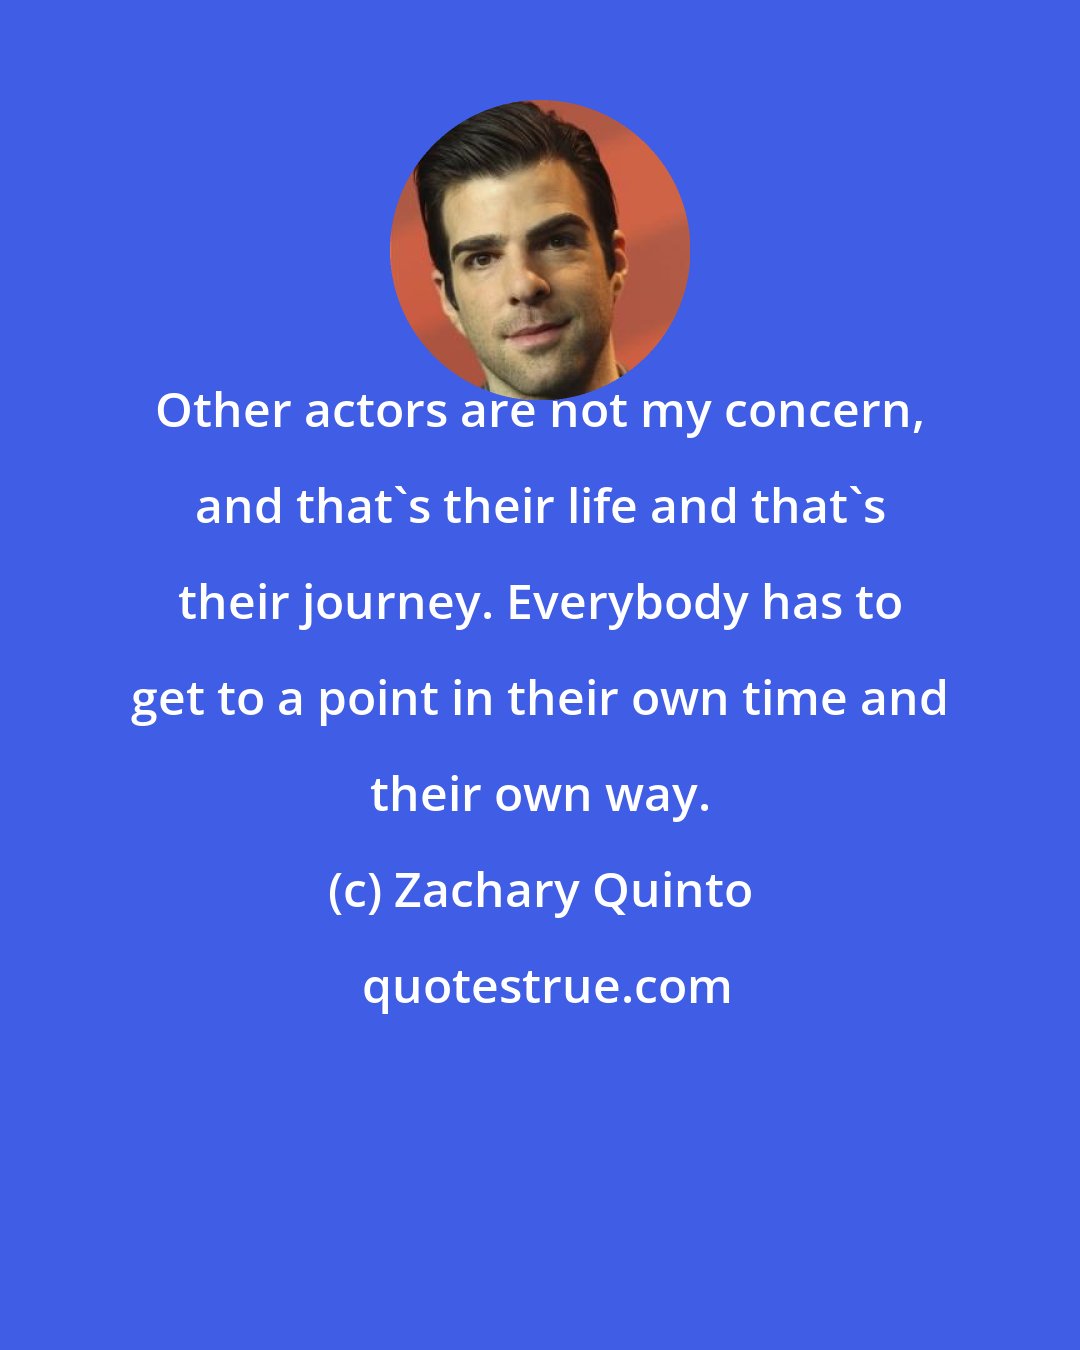 Zachary Quinto: Other actors are not my concern, and that's their life and that's their journey. Everybody has to get to a point in their own time and their own way.